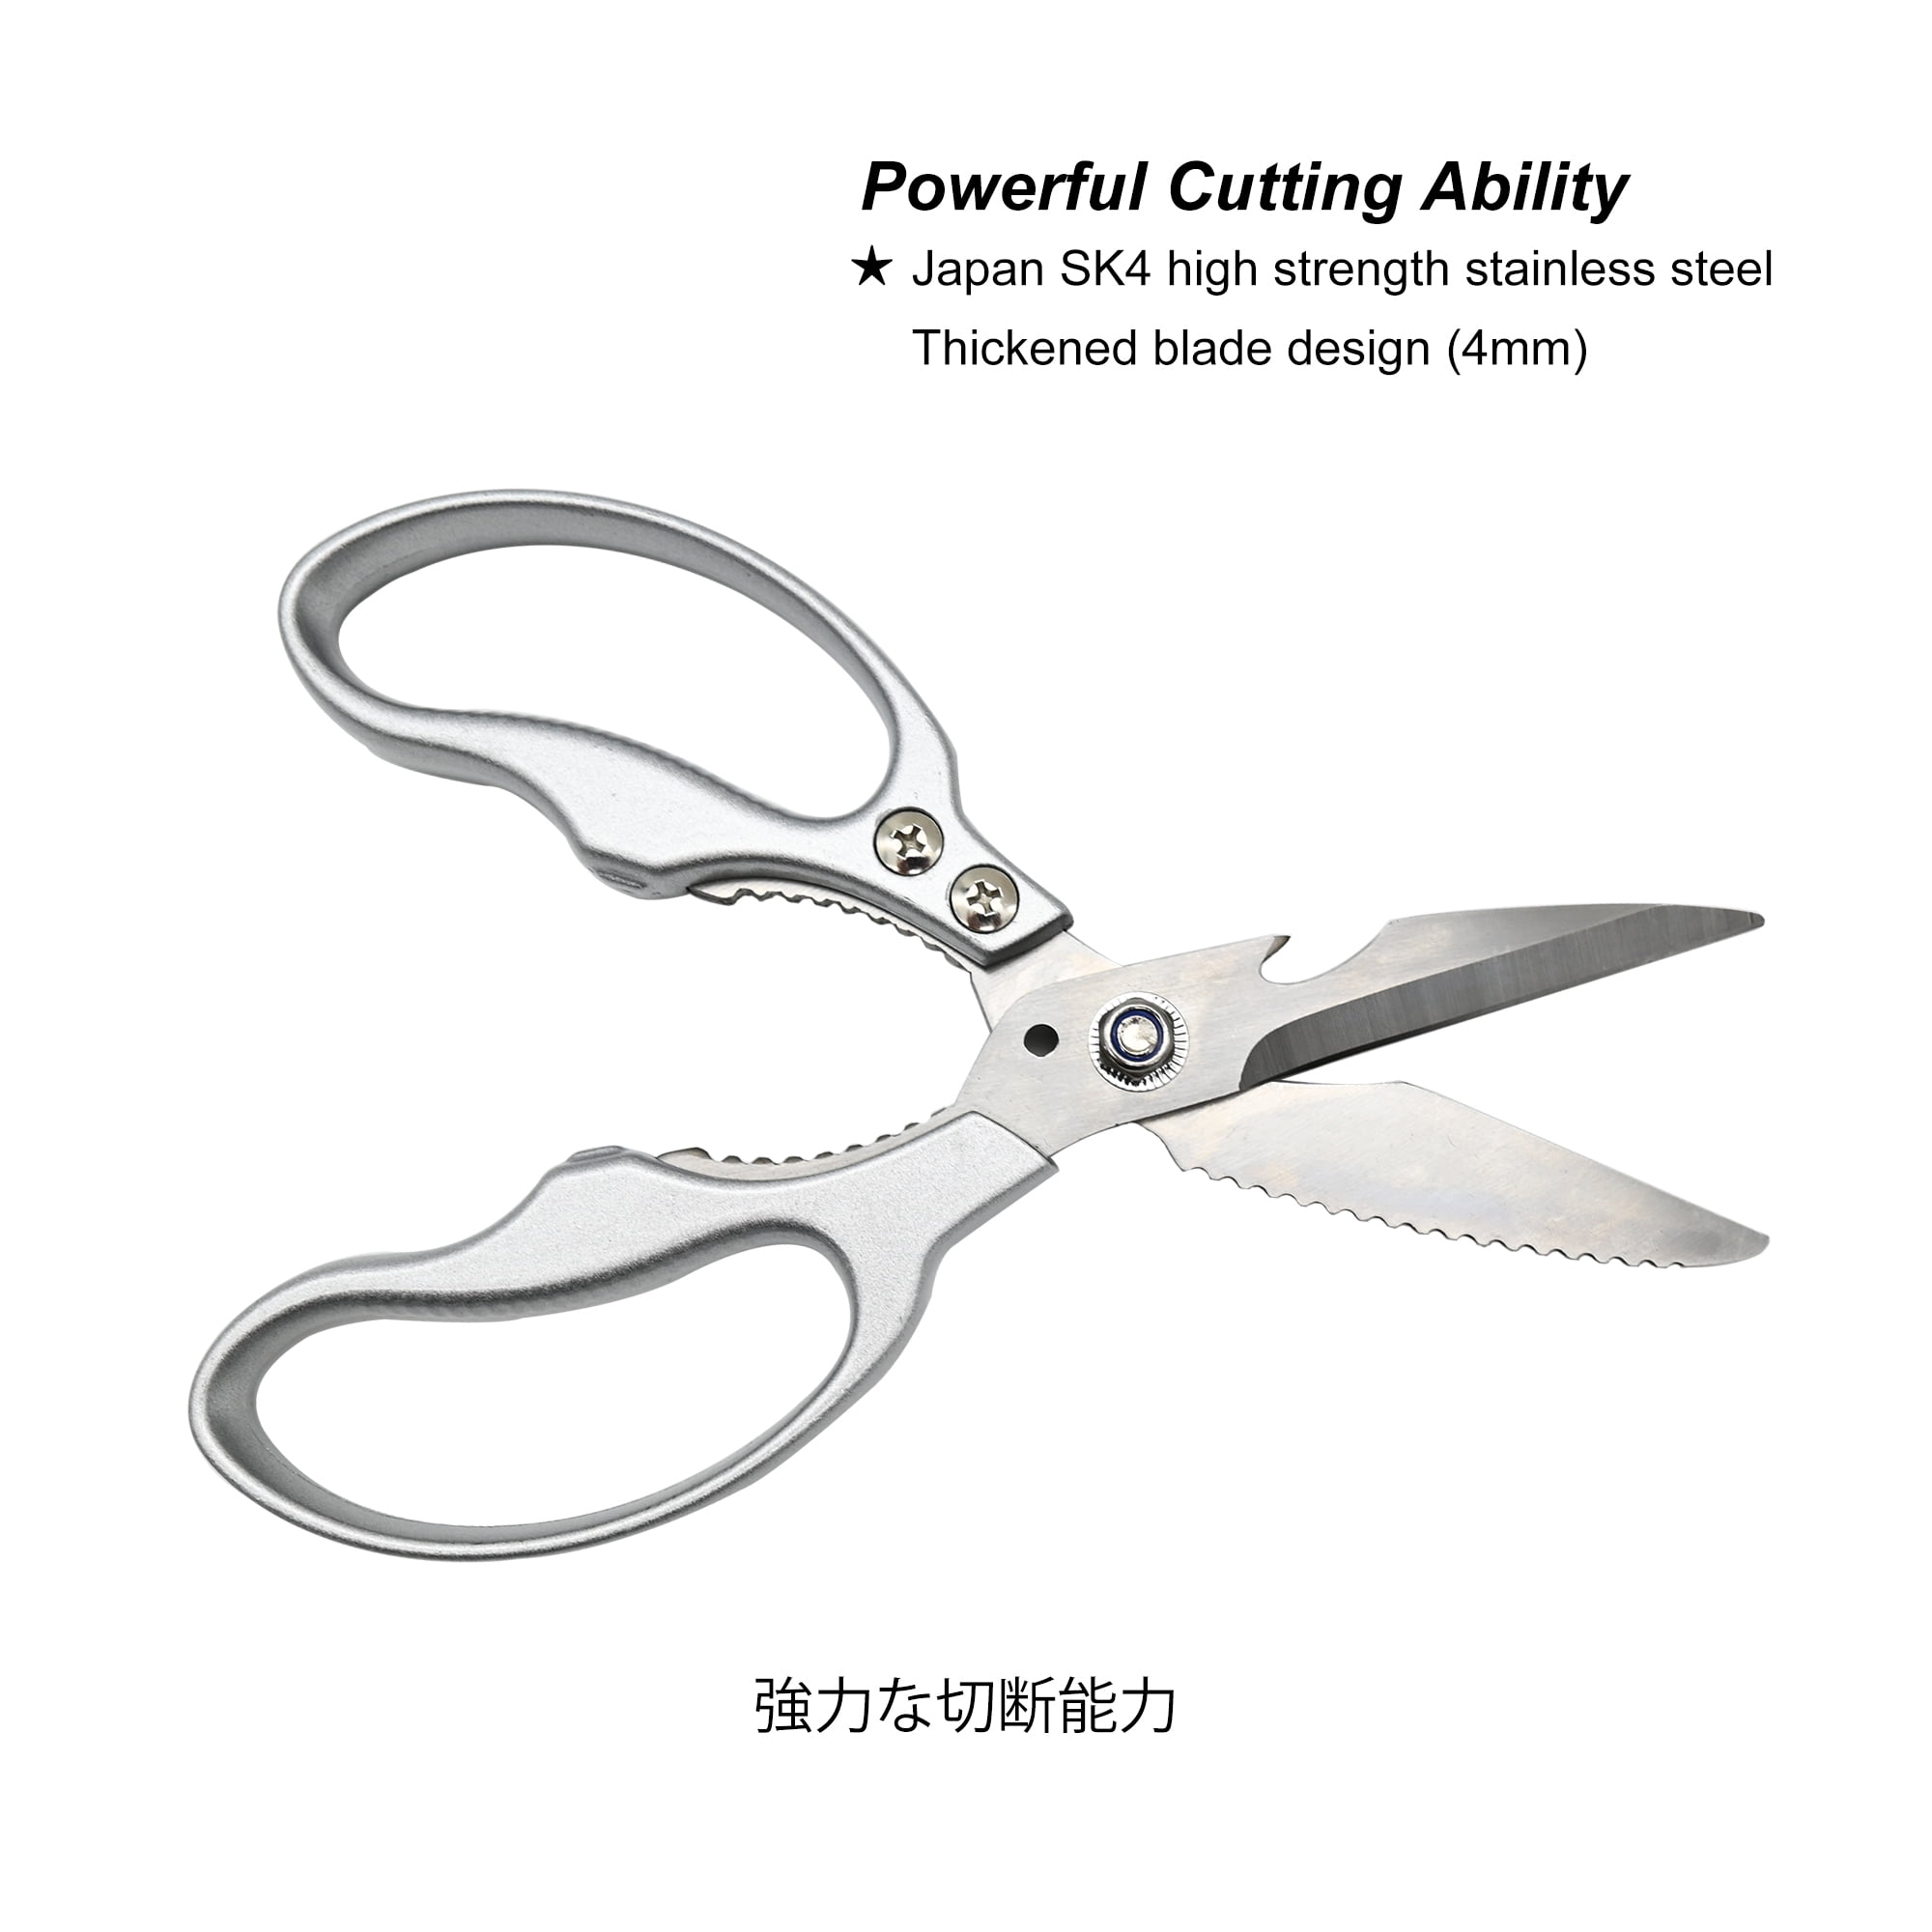 TONMA Kitchen Scissors All-Purpose [Made in Japan], Industrial Grade  Poultry Shears Heavy Duty with Ergonomic Handles, Ideal for Meat, Chicken,  Fish